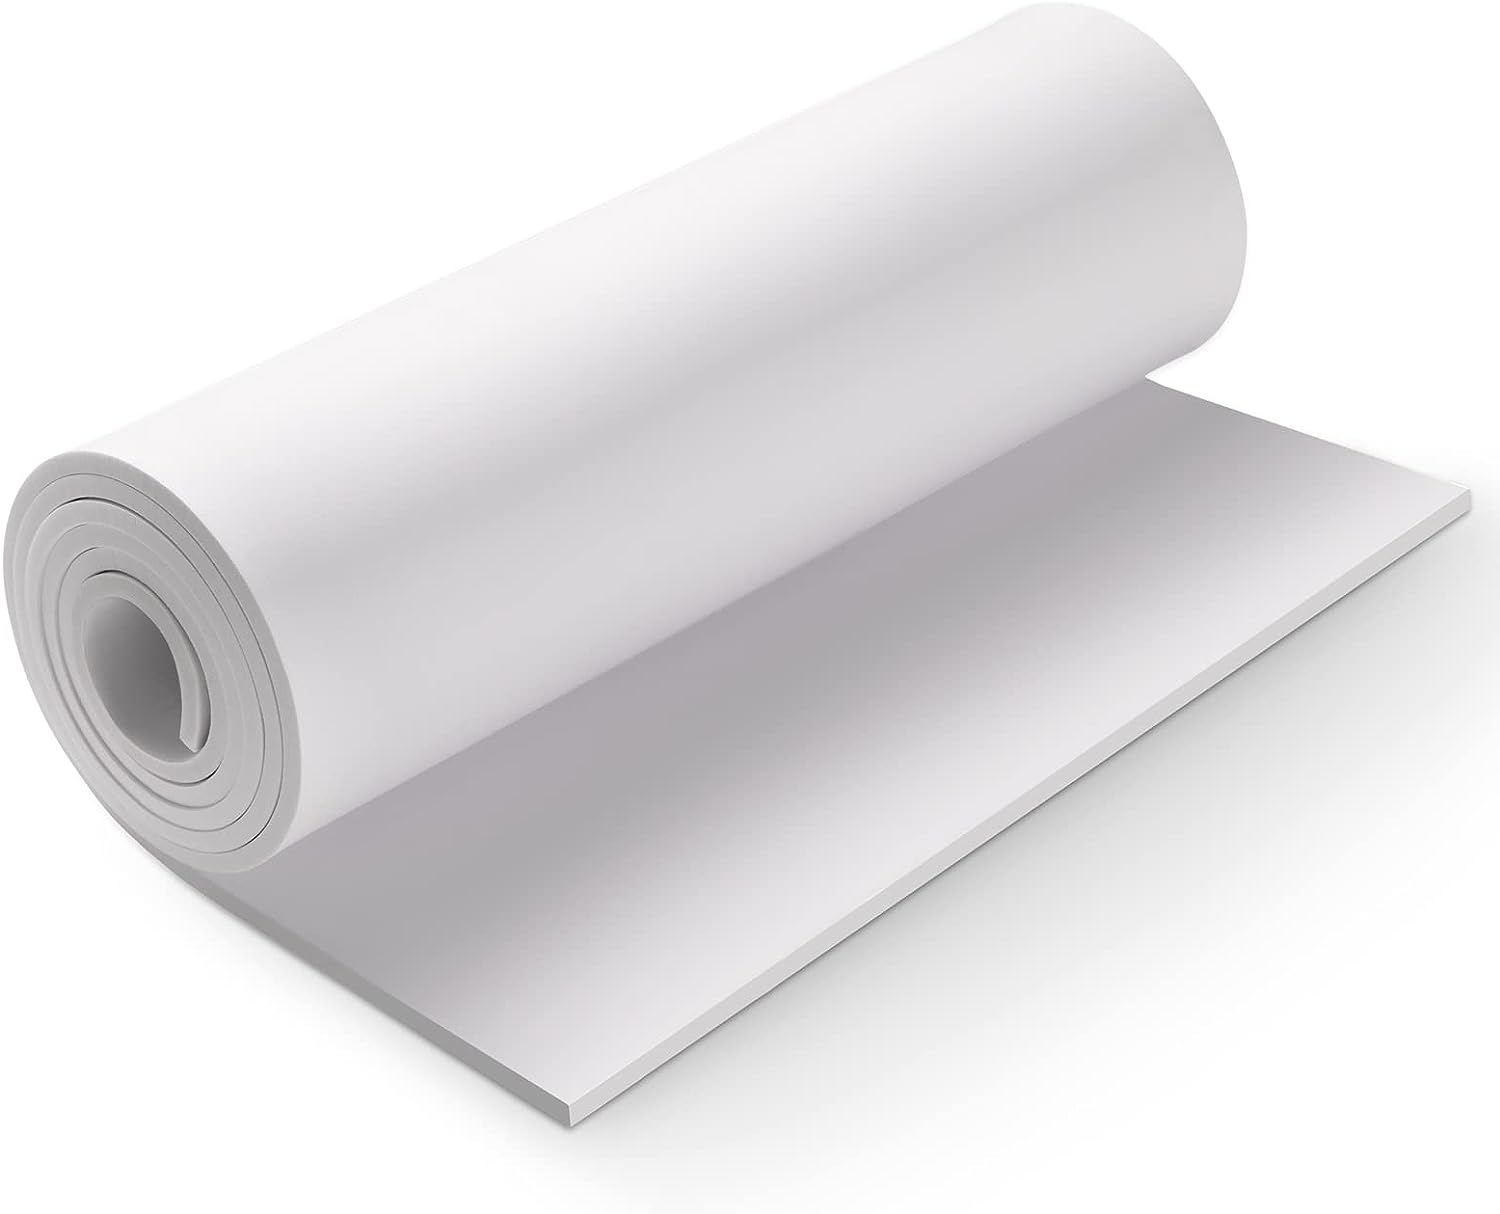 White Eva Foam Cosplay Sheets Roll Premium Eva Foam 6mm Thick 49"x13.9" High Density 86kg/m3 For Cosplay Costume Crafts DIY Projects By PAIDU